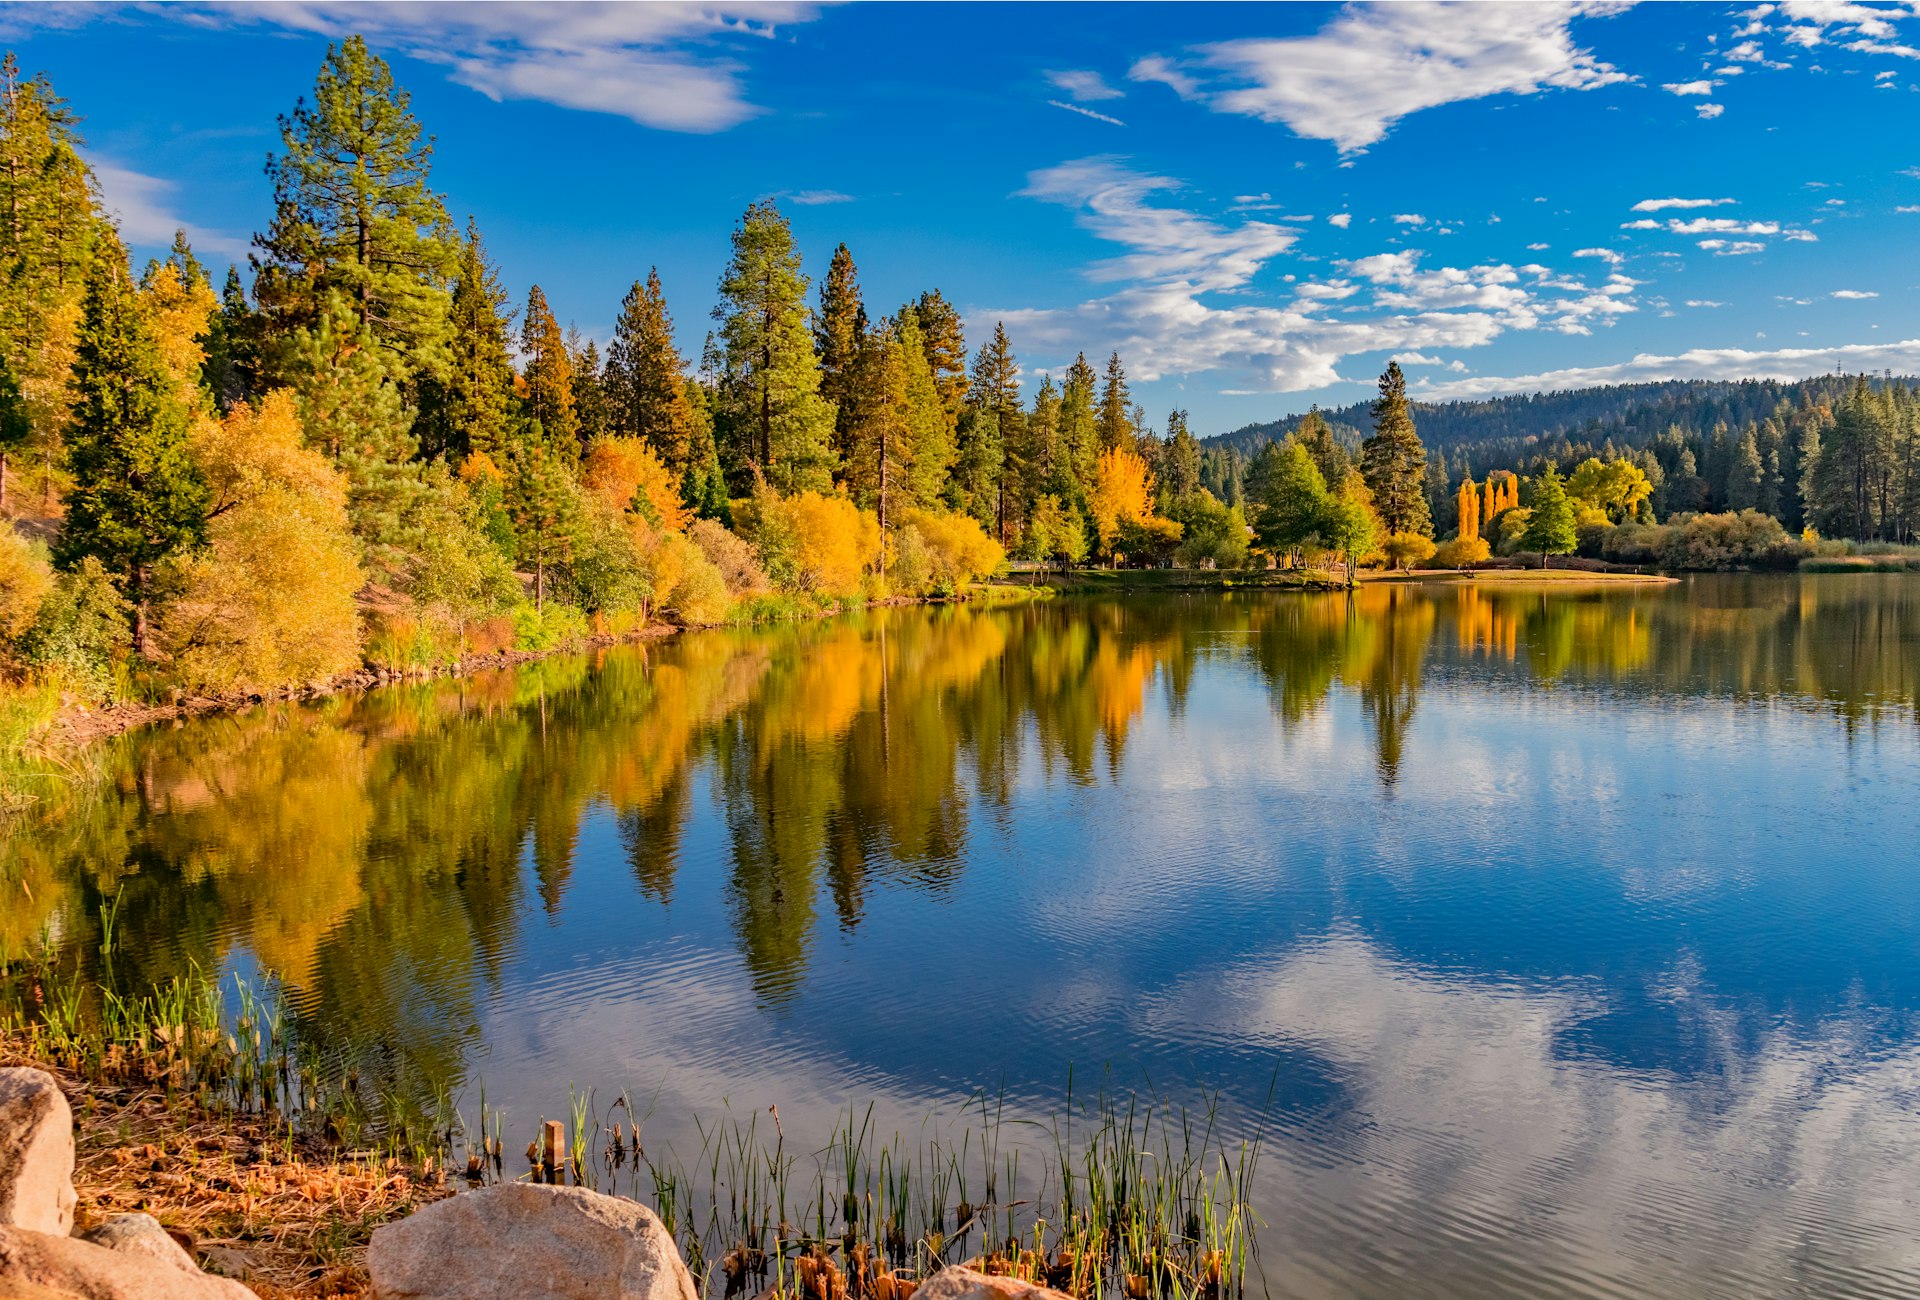 Yellow leaves adorn the trees that surround the crystal blue Big Bear Lake in California